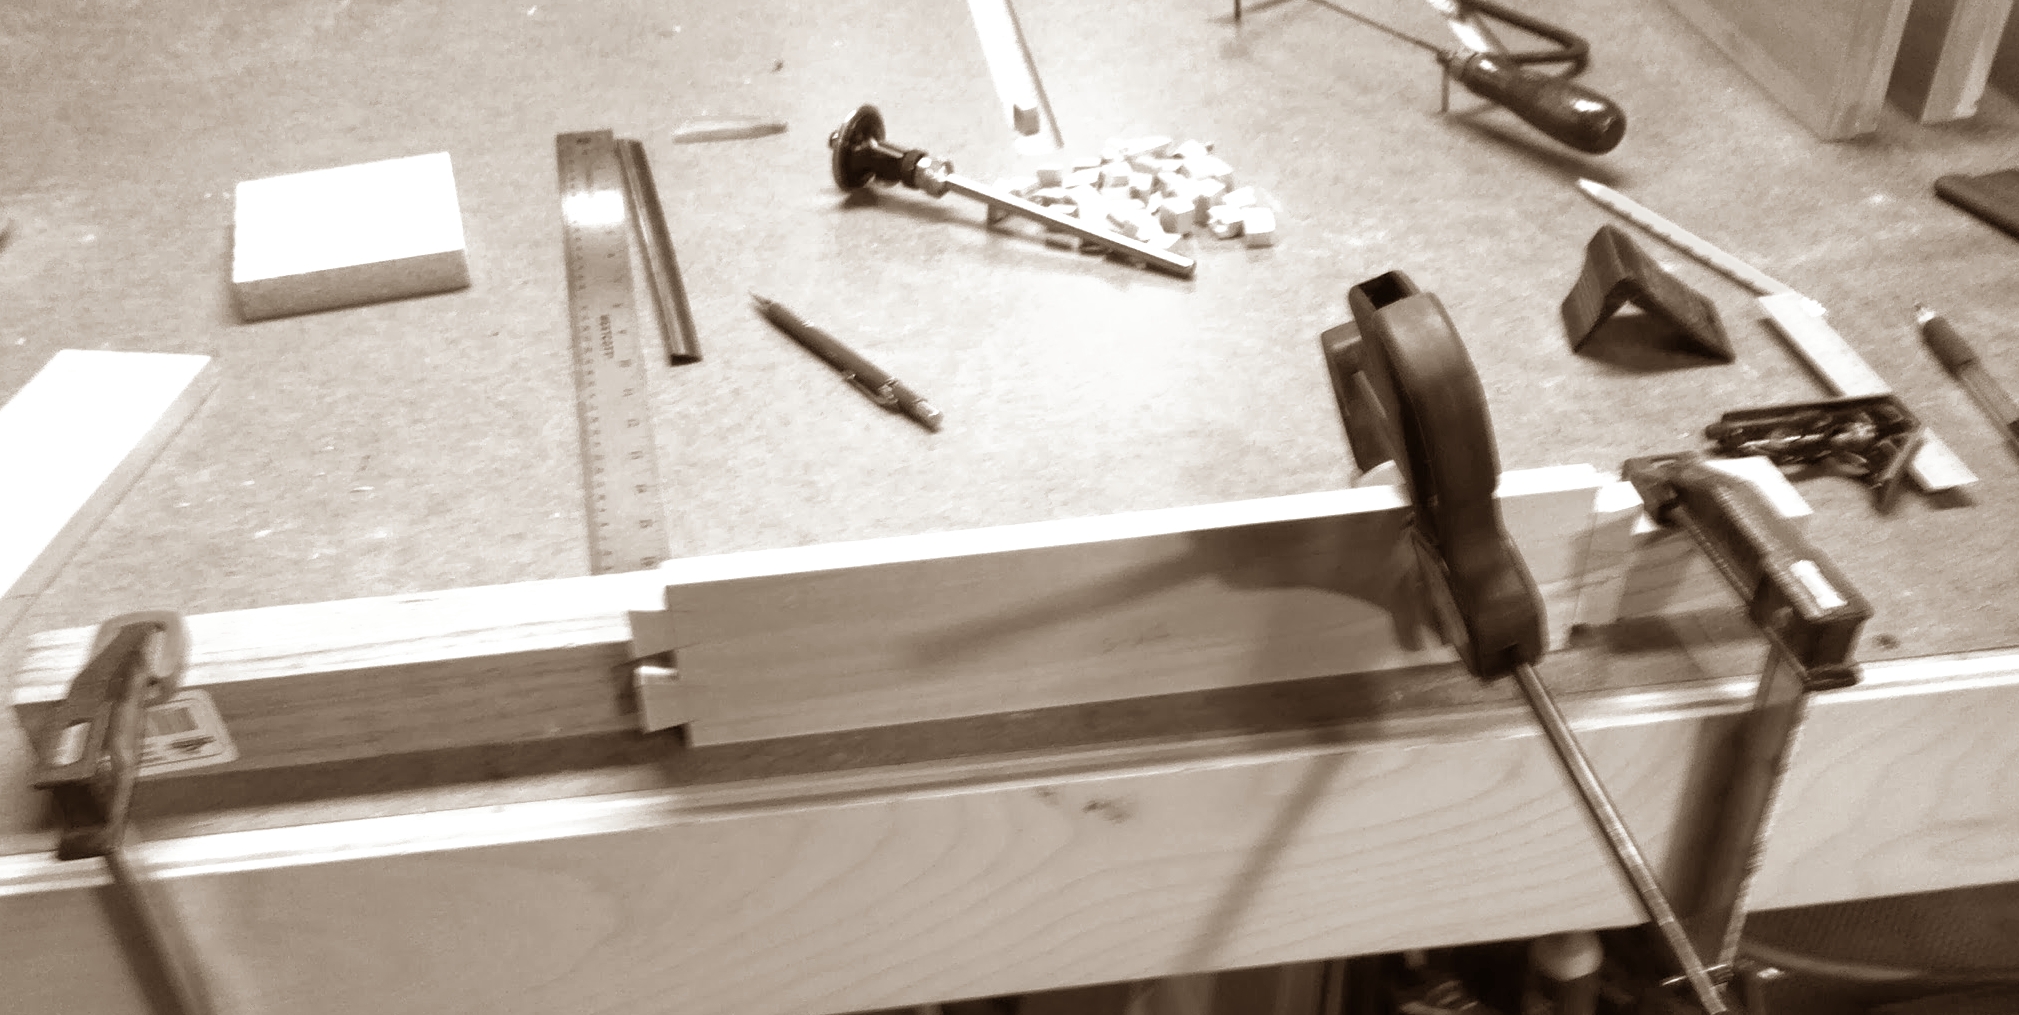 Jury-rigged bracket to hold drawer sides while cutting sides